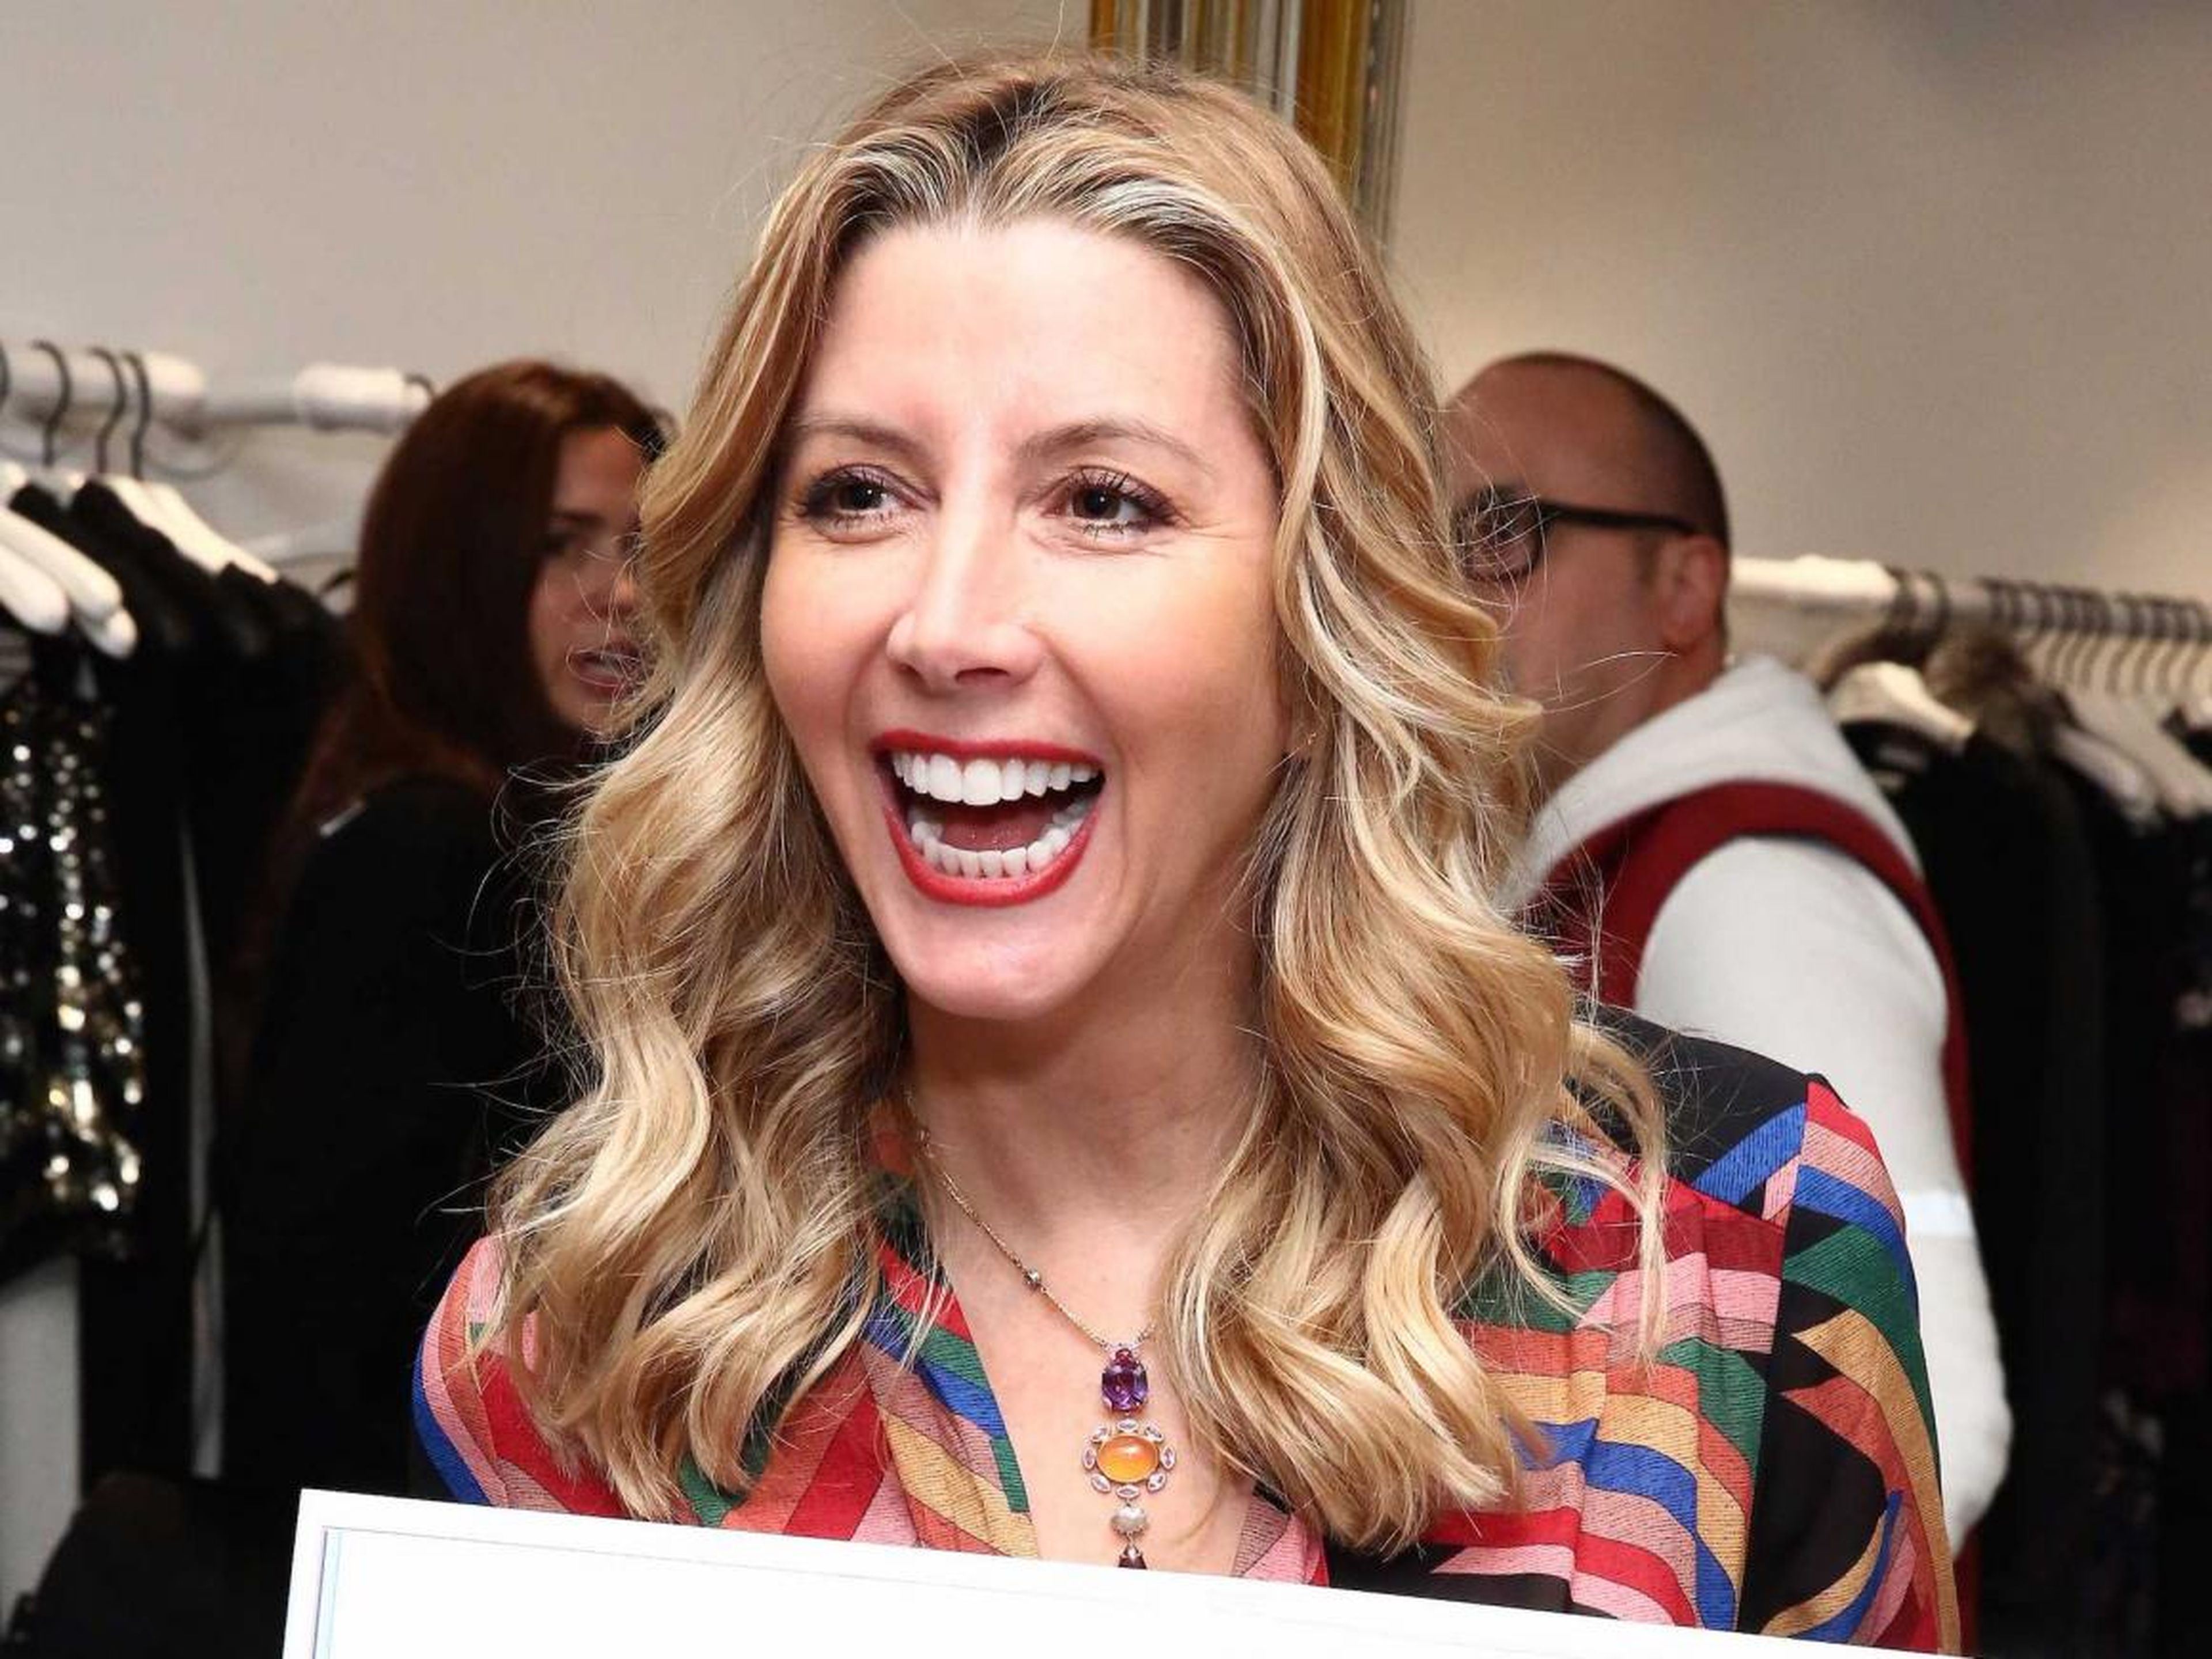 Sara Blakely, CEO of Spanx, said she does her best thinking in her car on the commute to work. She even wakes up an hour early to get more commuting time, she said.